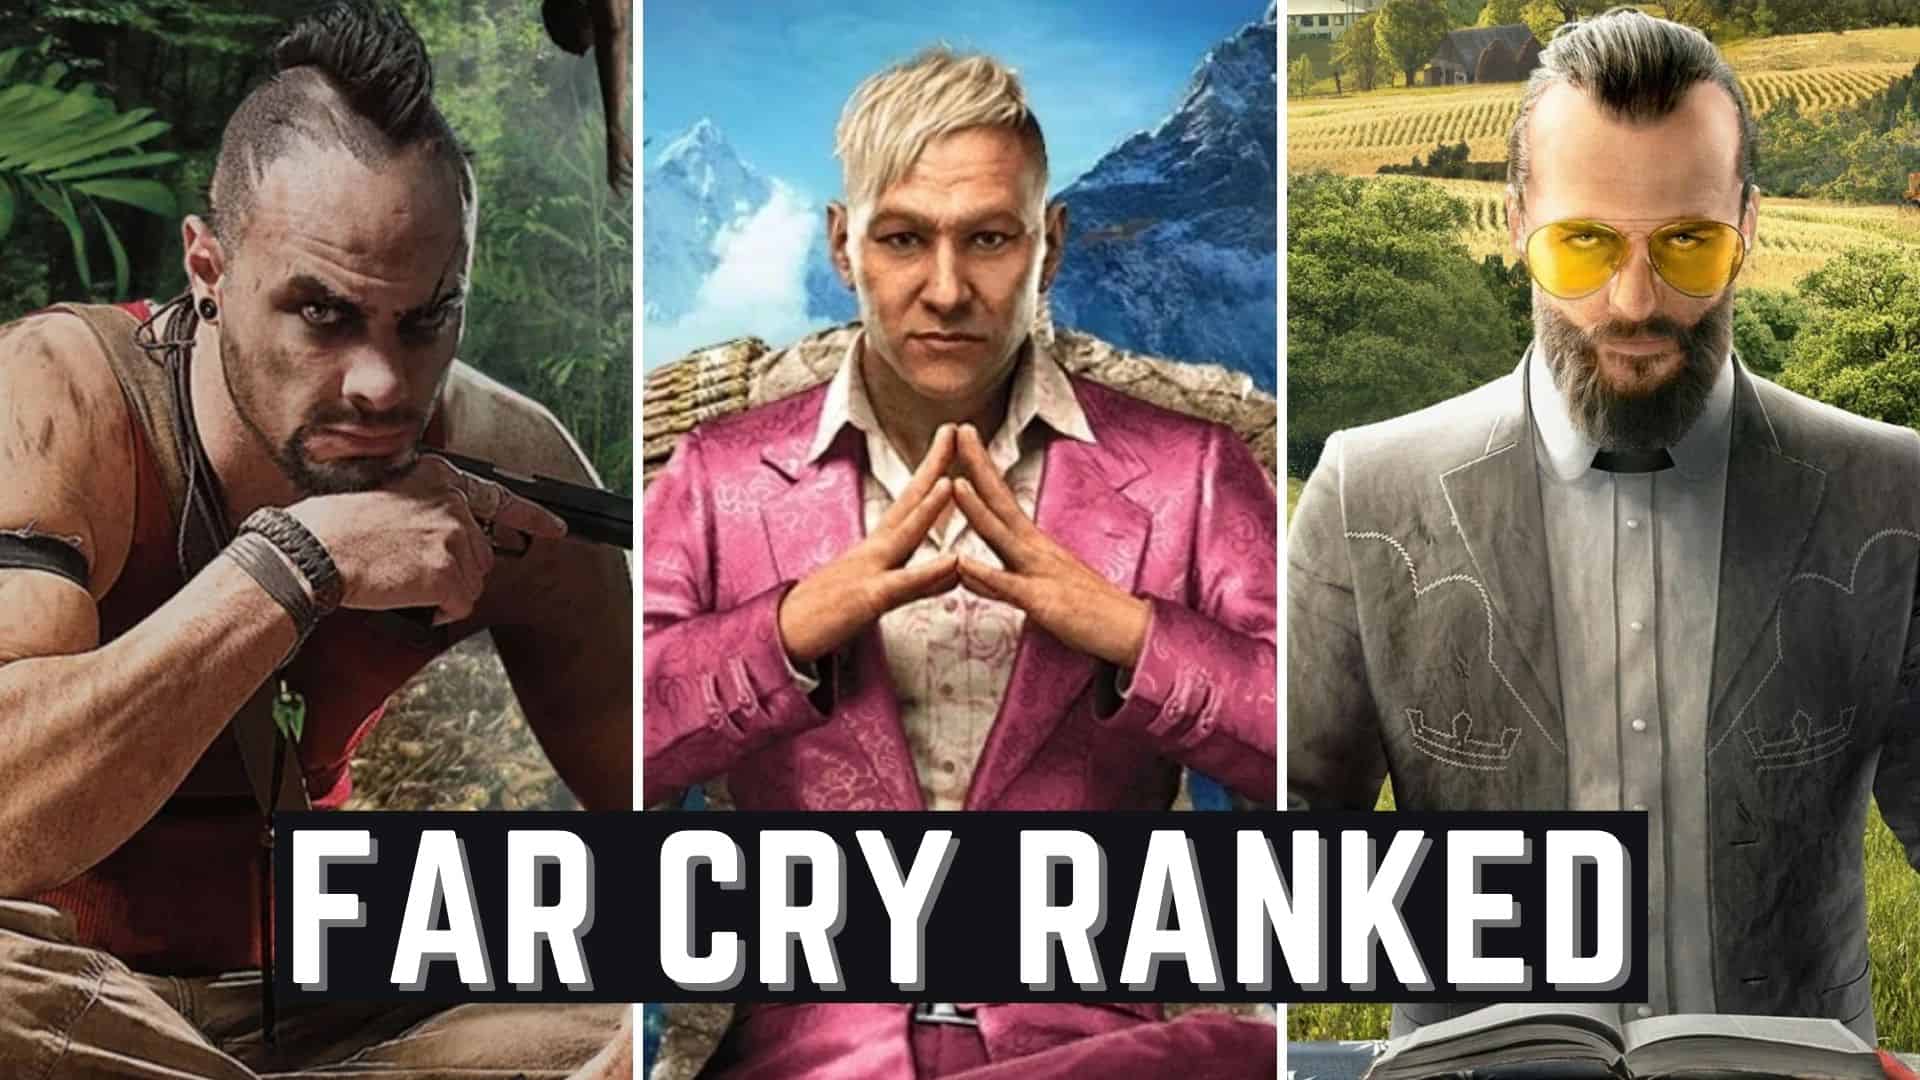 5 things we know about Far Cry 6 so far - Dexerto